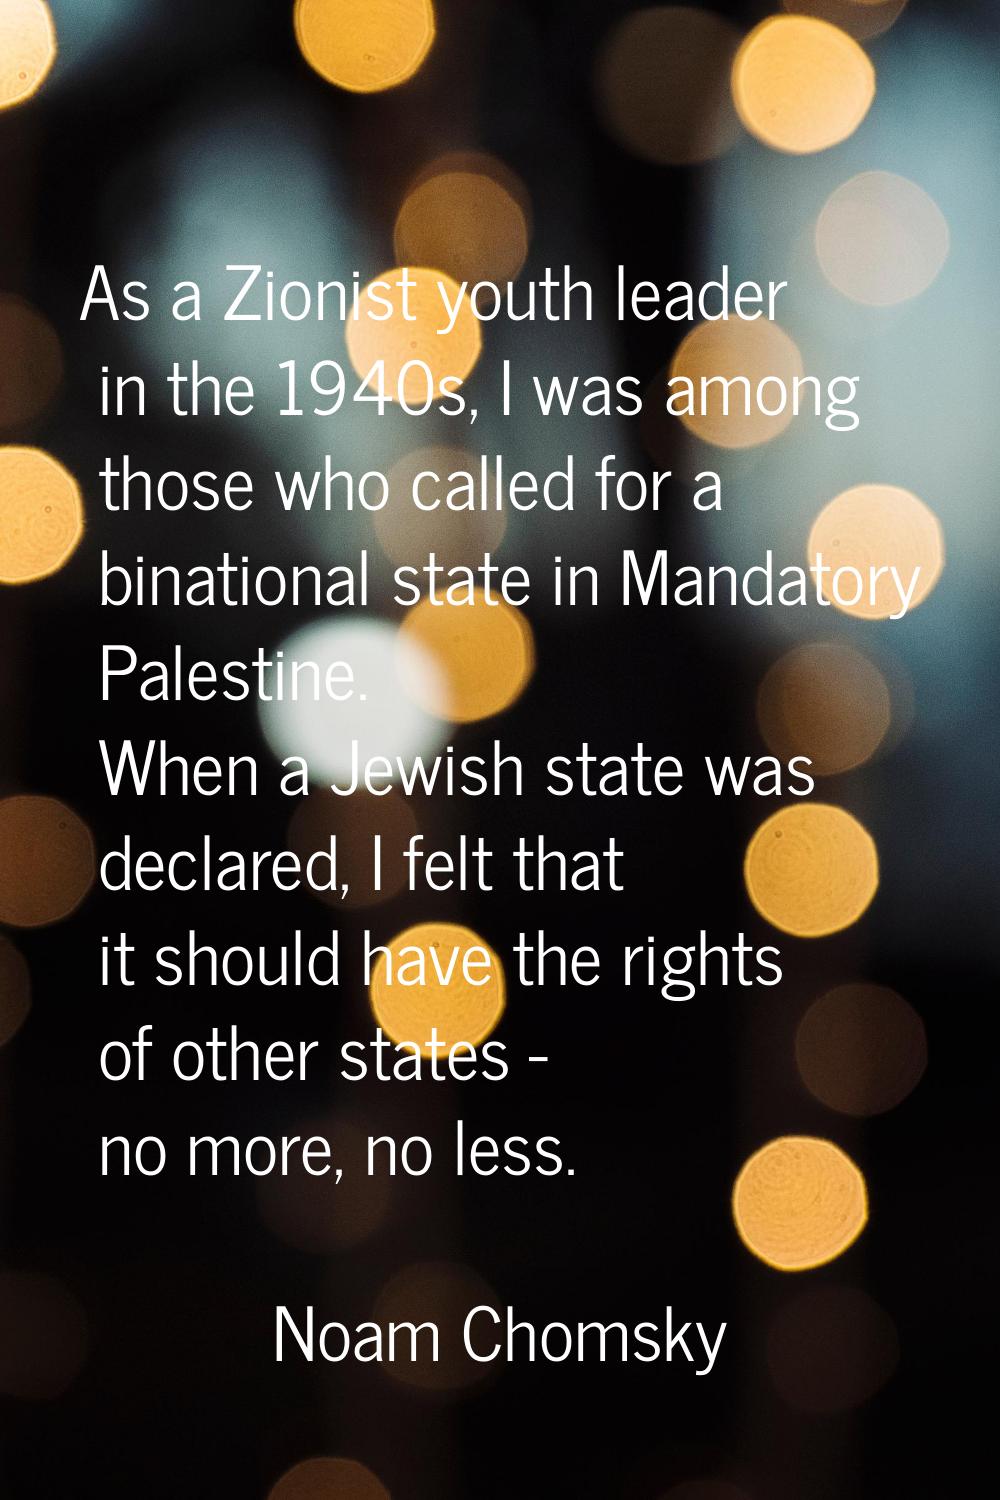 As a Zionist youth leader in the 1940s, I was among those who called for a binational state in Mand